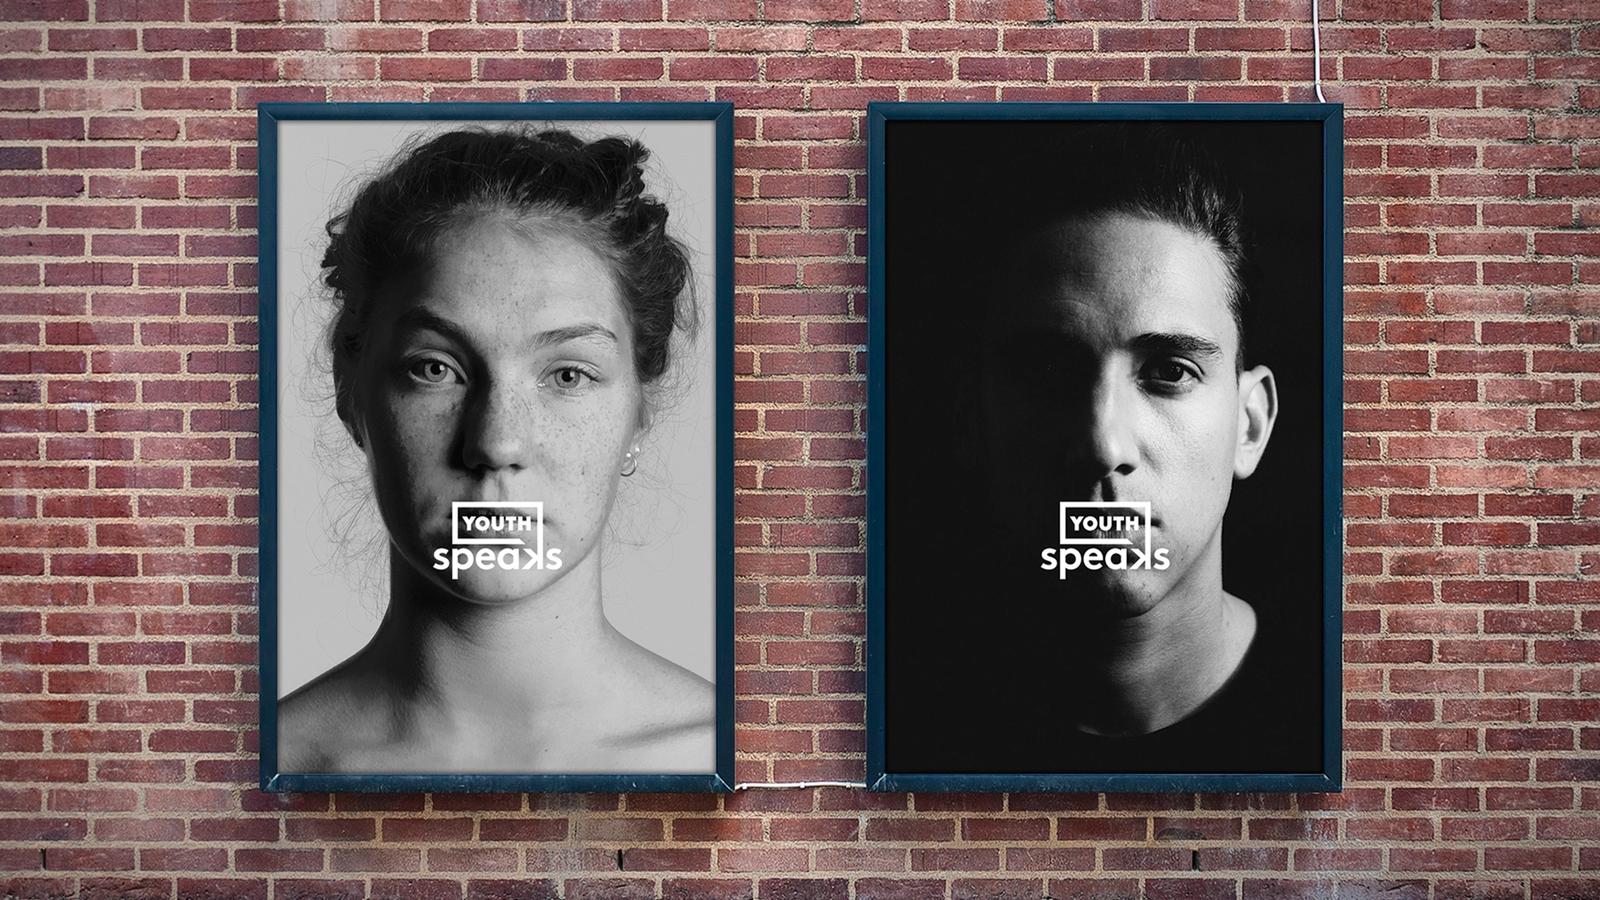  Youth Speaks ad campaign